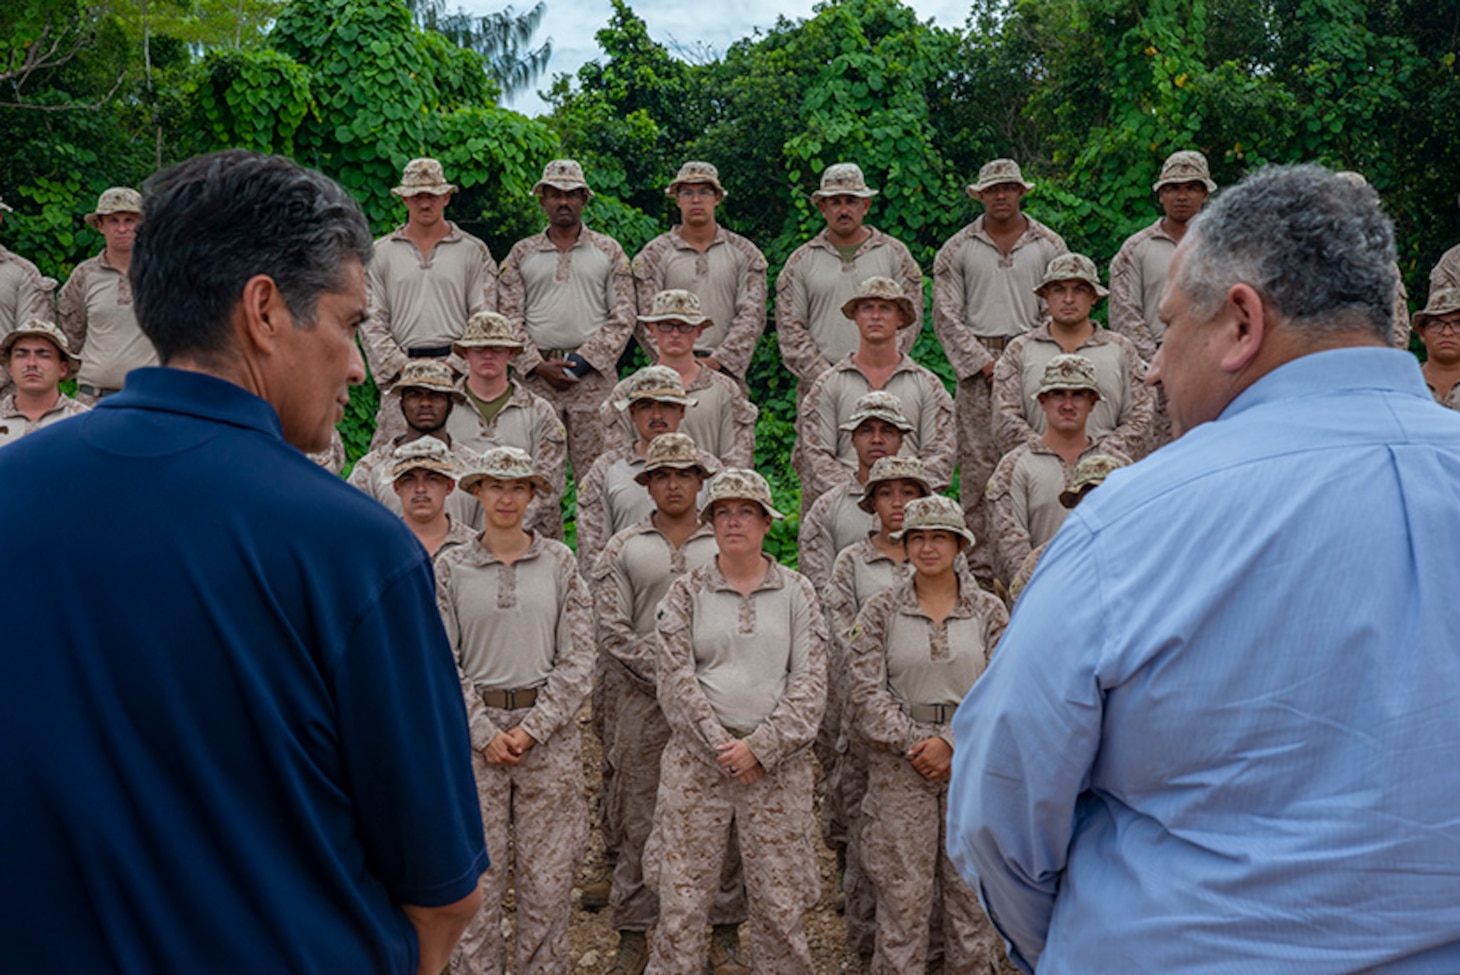 PELELIU, Republic of Palau (March 1, 2024) – Republic of Palau President Surangel Whipps, Jr. and Secretary of the Navy Carlos Del Toro meet with Marines of the 1st Marine Logistics
Group in Peleliu, in the Republic of Palau, March 1. Secretary Del Toro’s visit to Palau is part of a series of strategic engagements in the Indo-Pacific to promote the protection of the maritime commons in line with his Maritime Statecraft efforts. (U.S. Navy photo by Shaina O’Neal/Released)